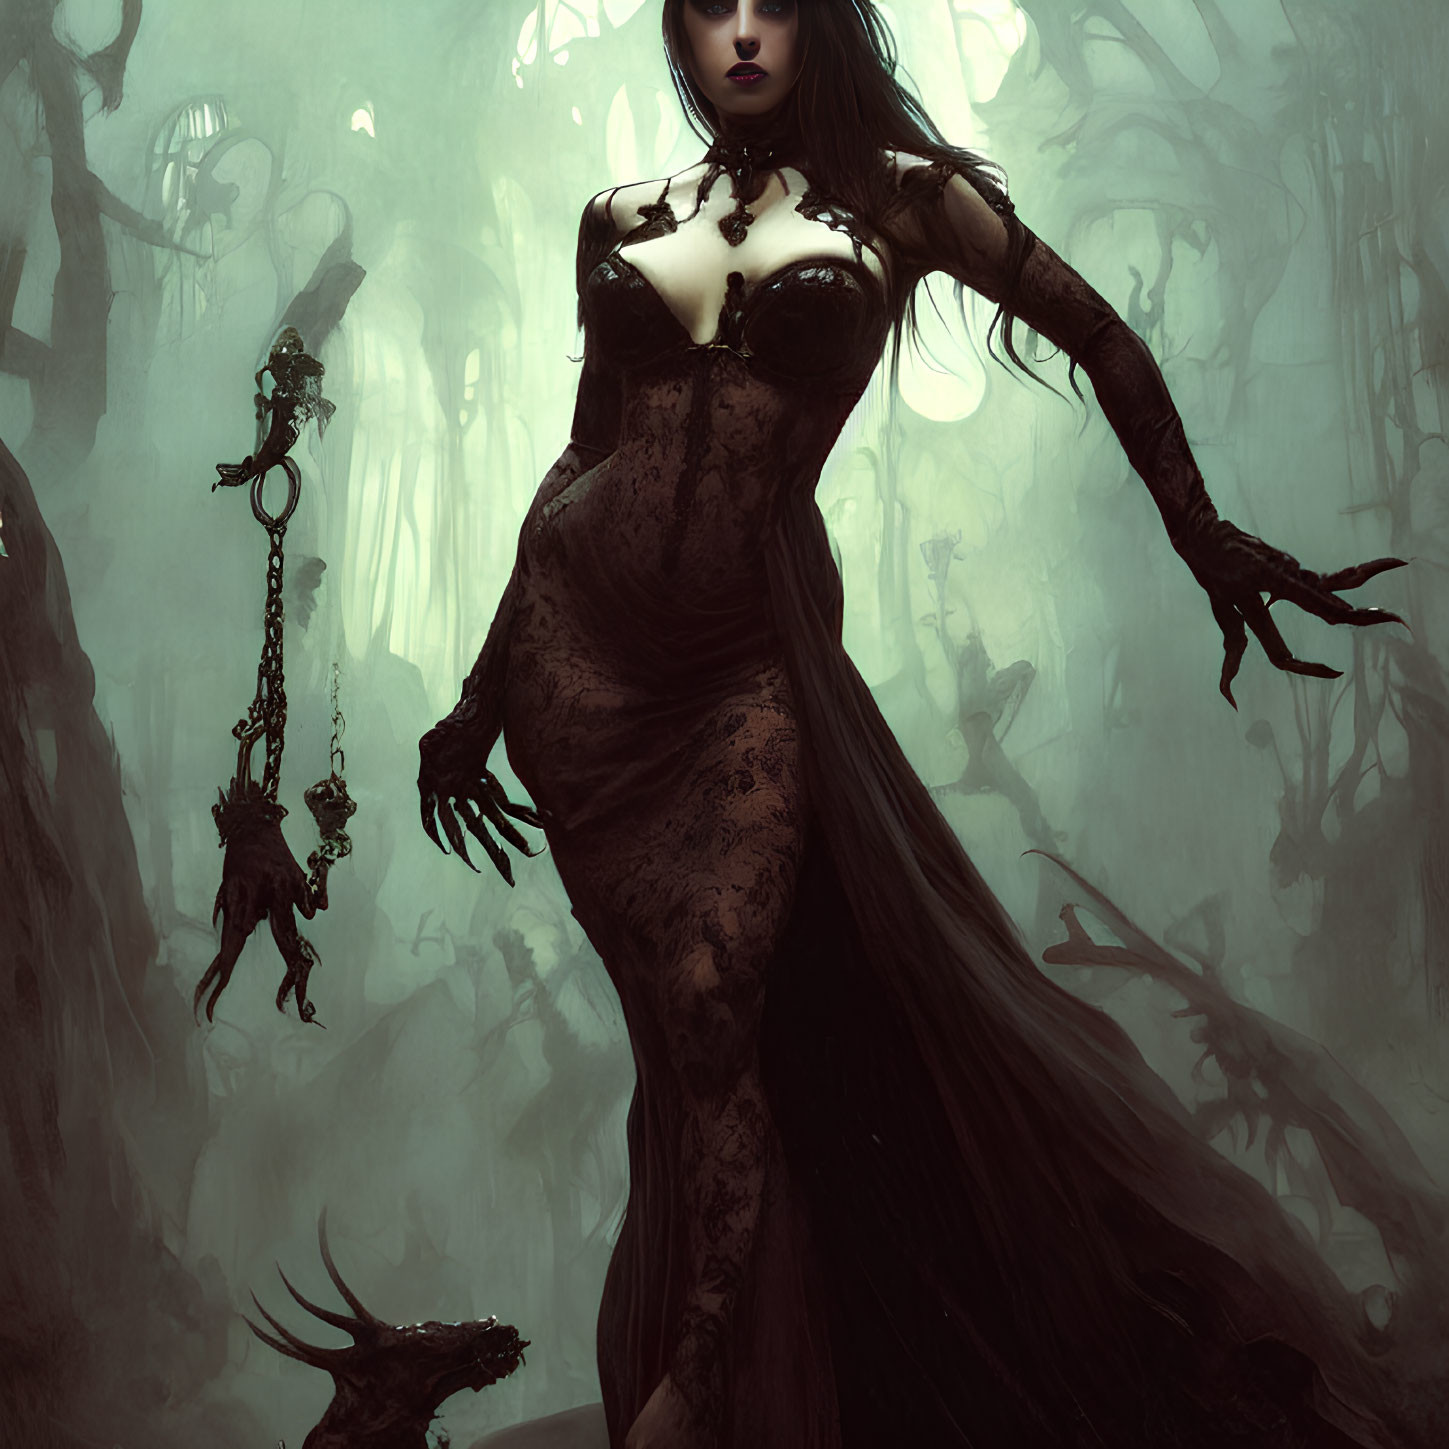 Gothic fantasy illustration of a woman in ethereal dress with sinister ambiance